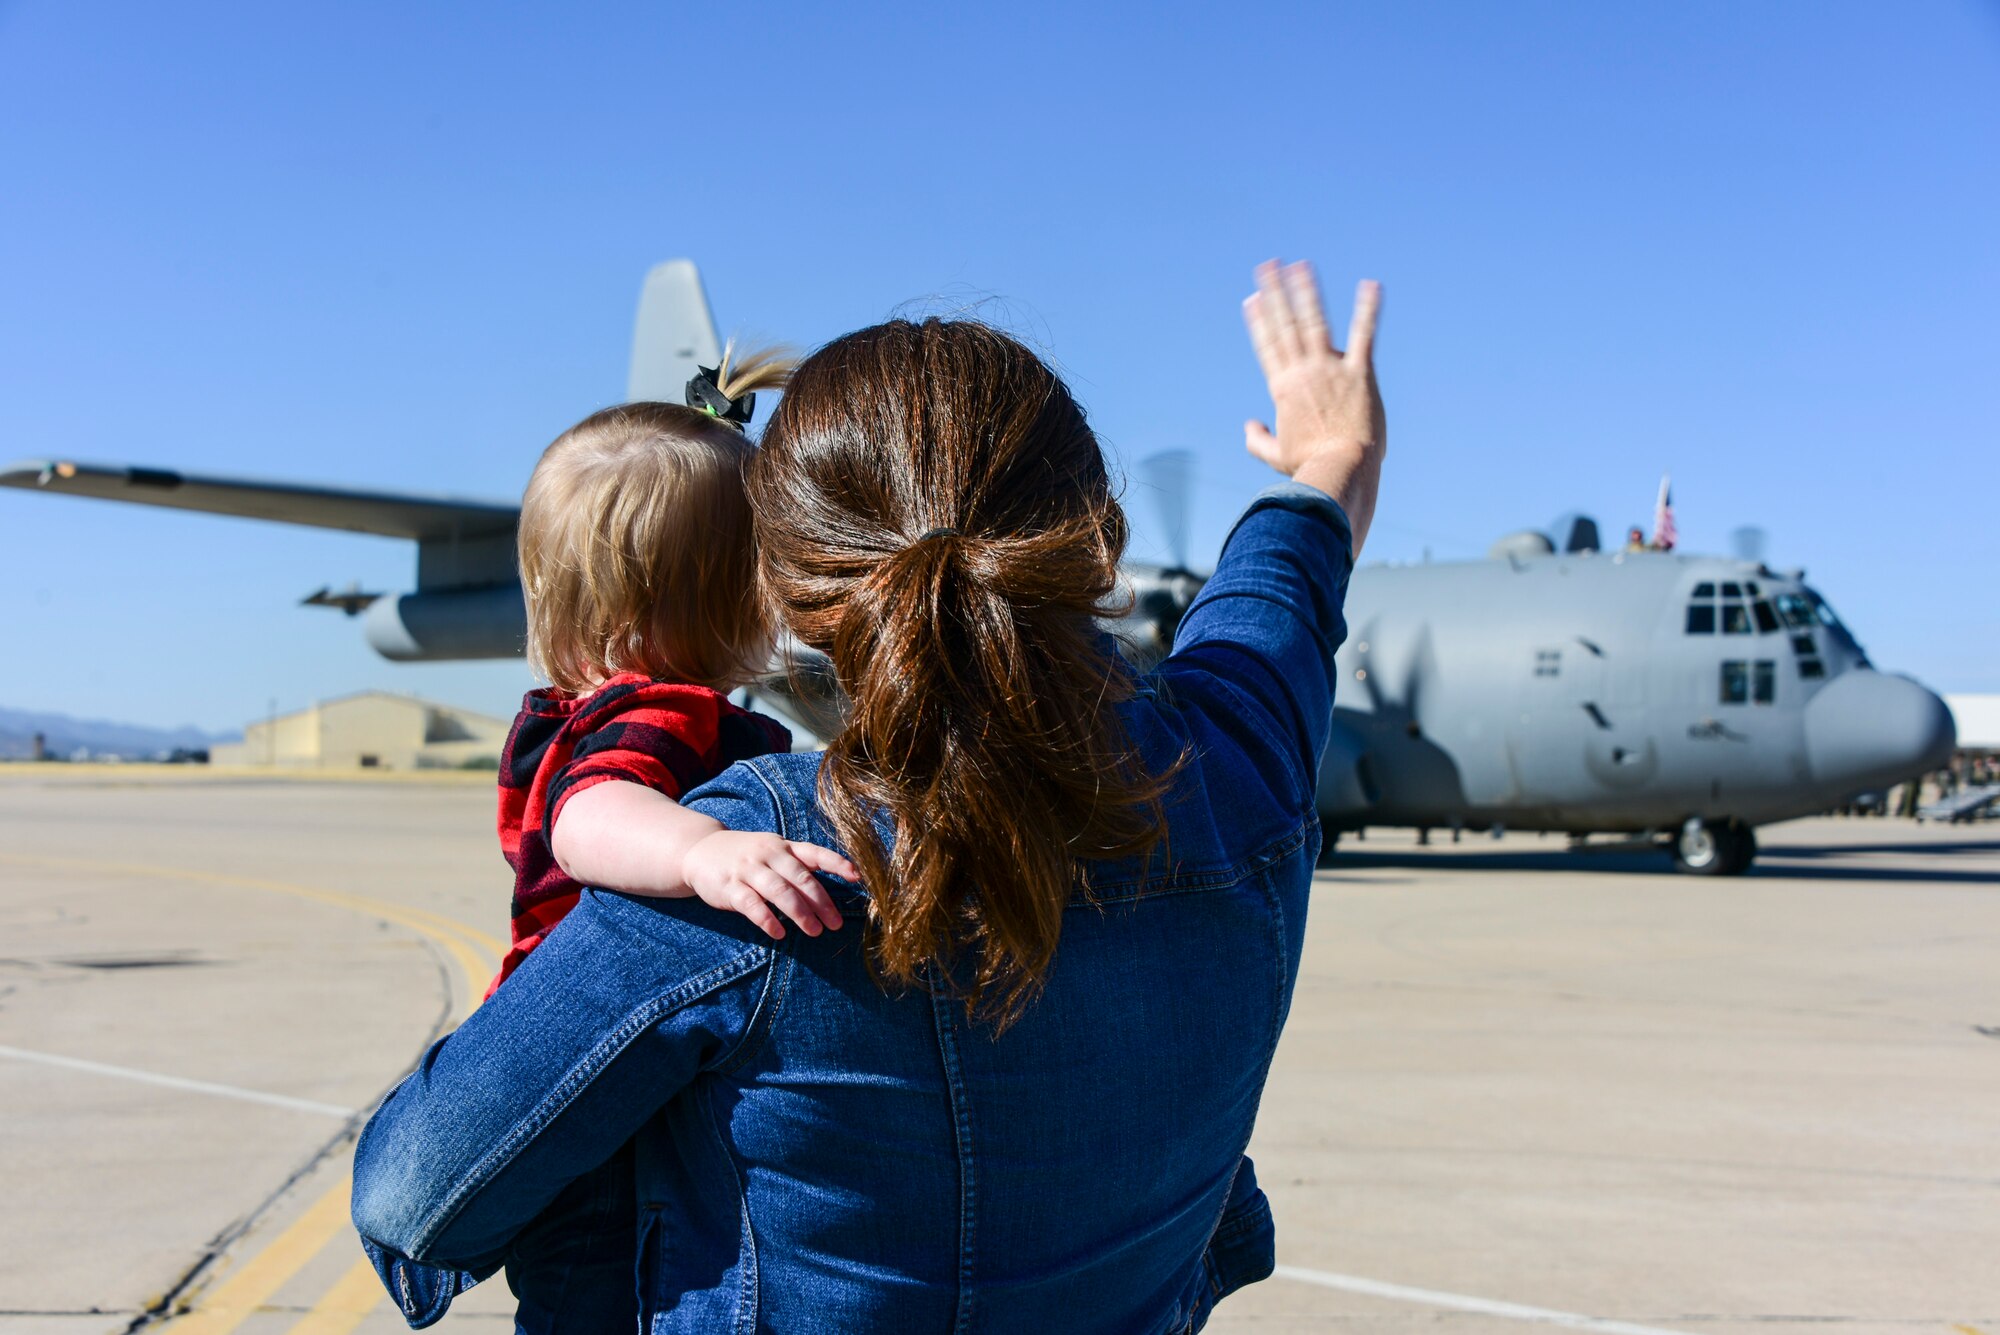 A photo of a woman and her child waving to an EC-130H as it parks.